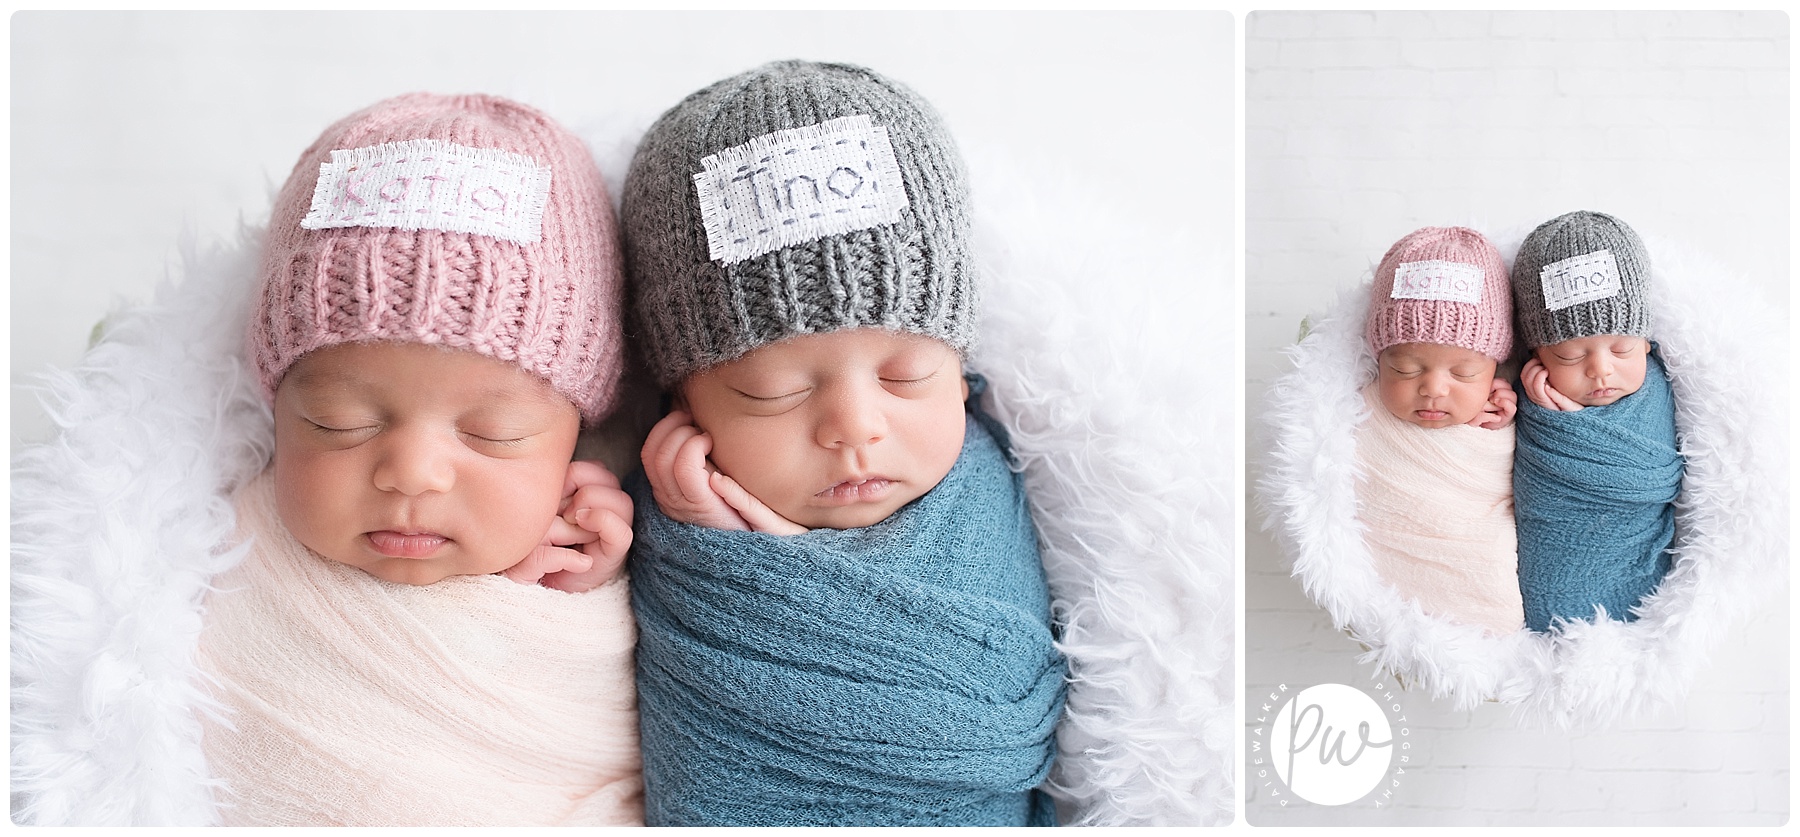 twin babies with their names on their hats